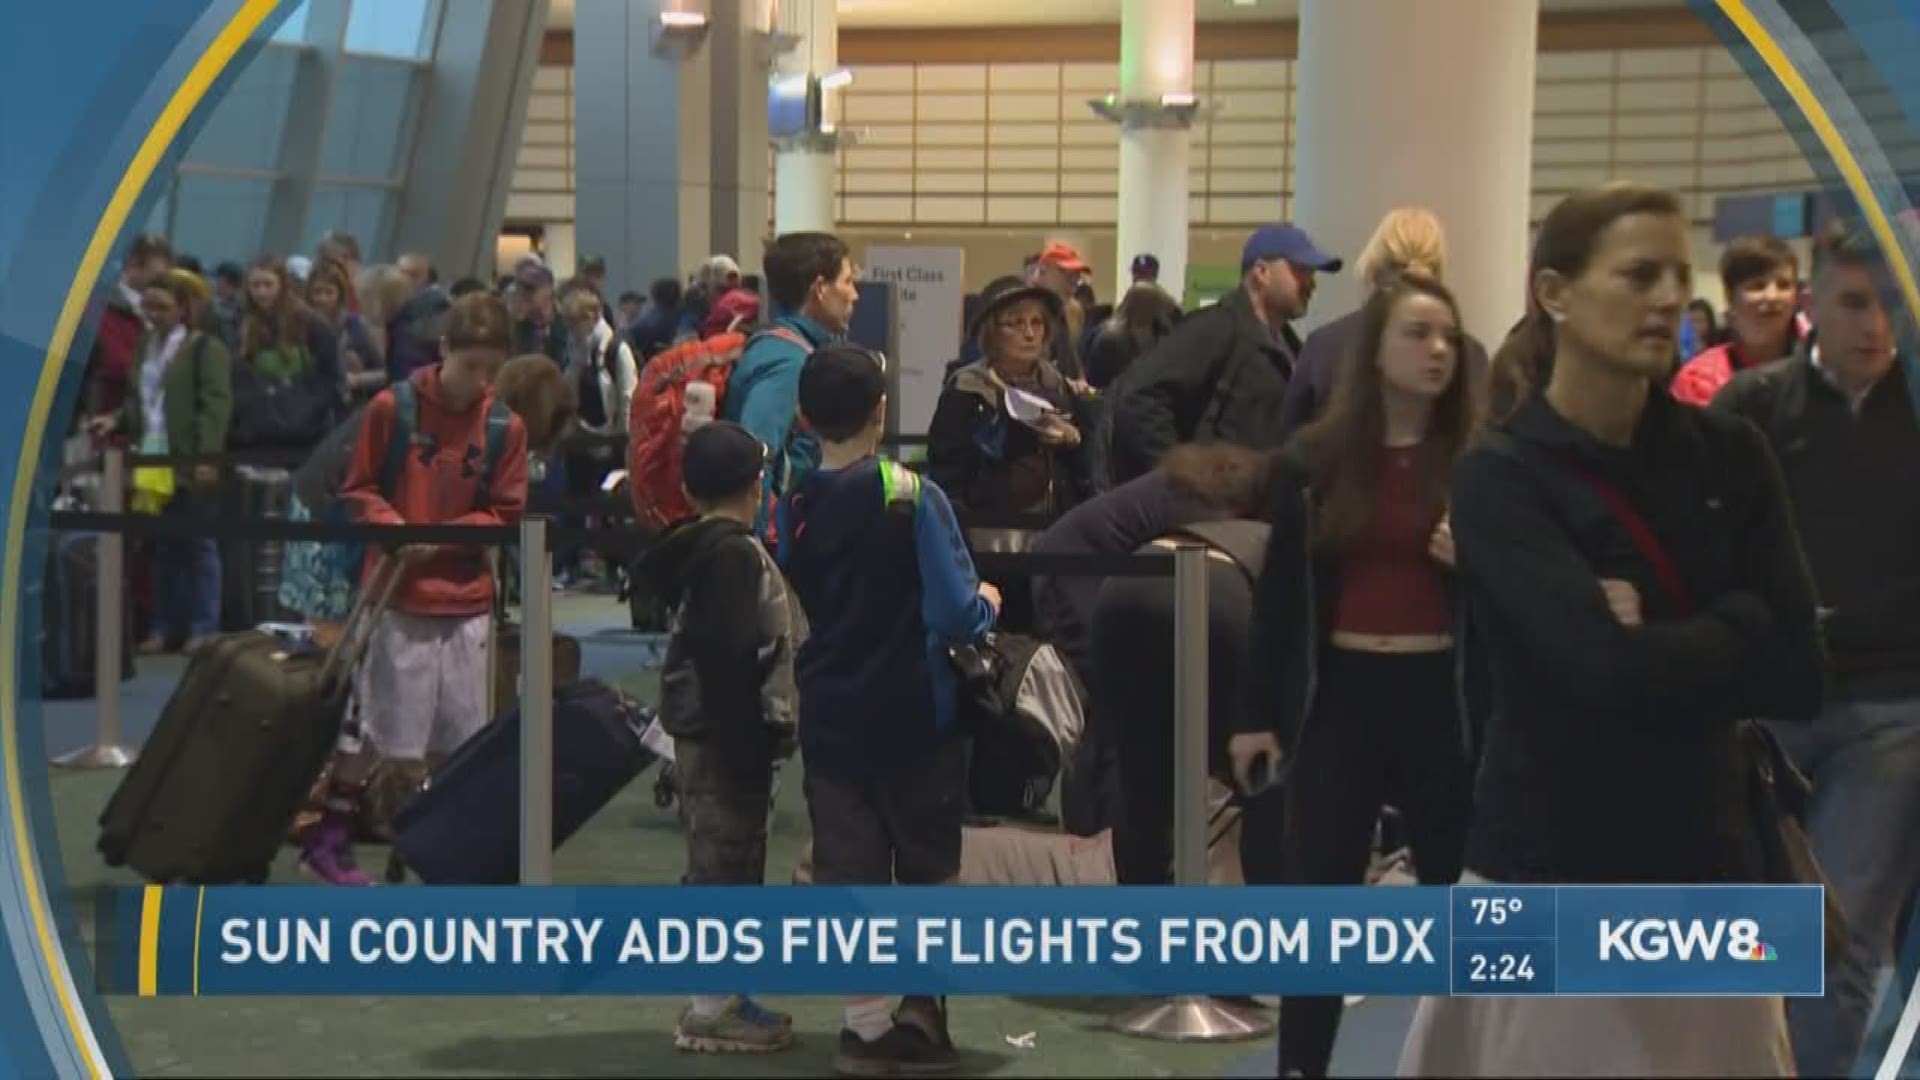 Sun Country adds five flights from PDX